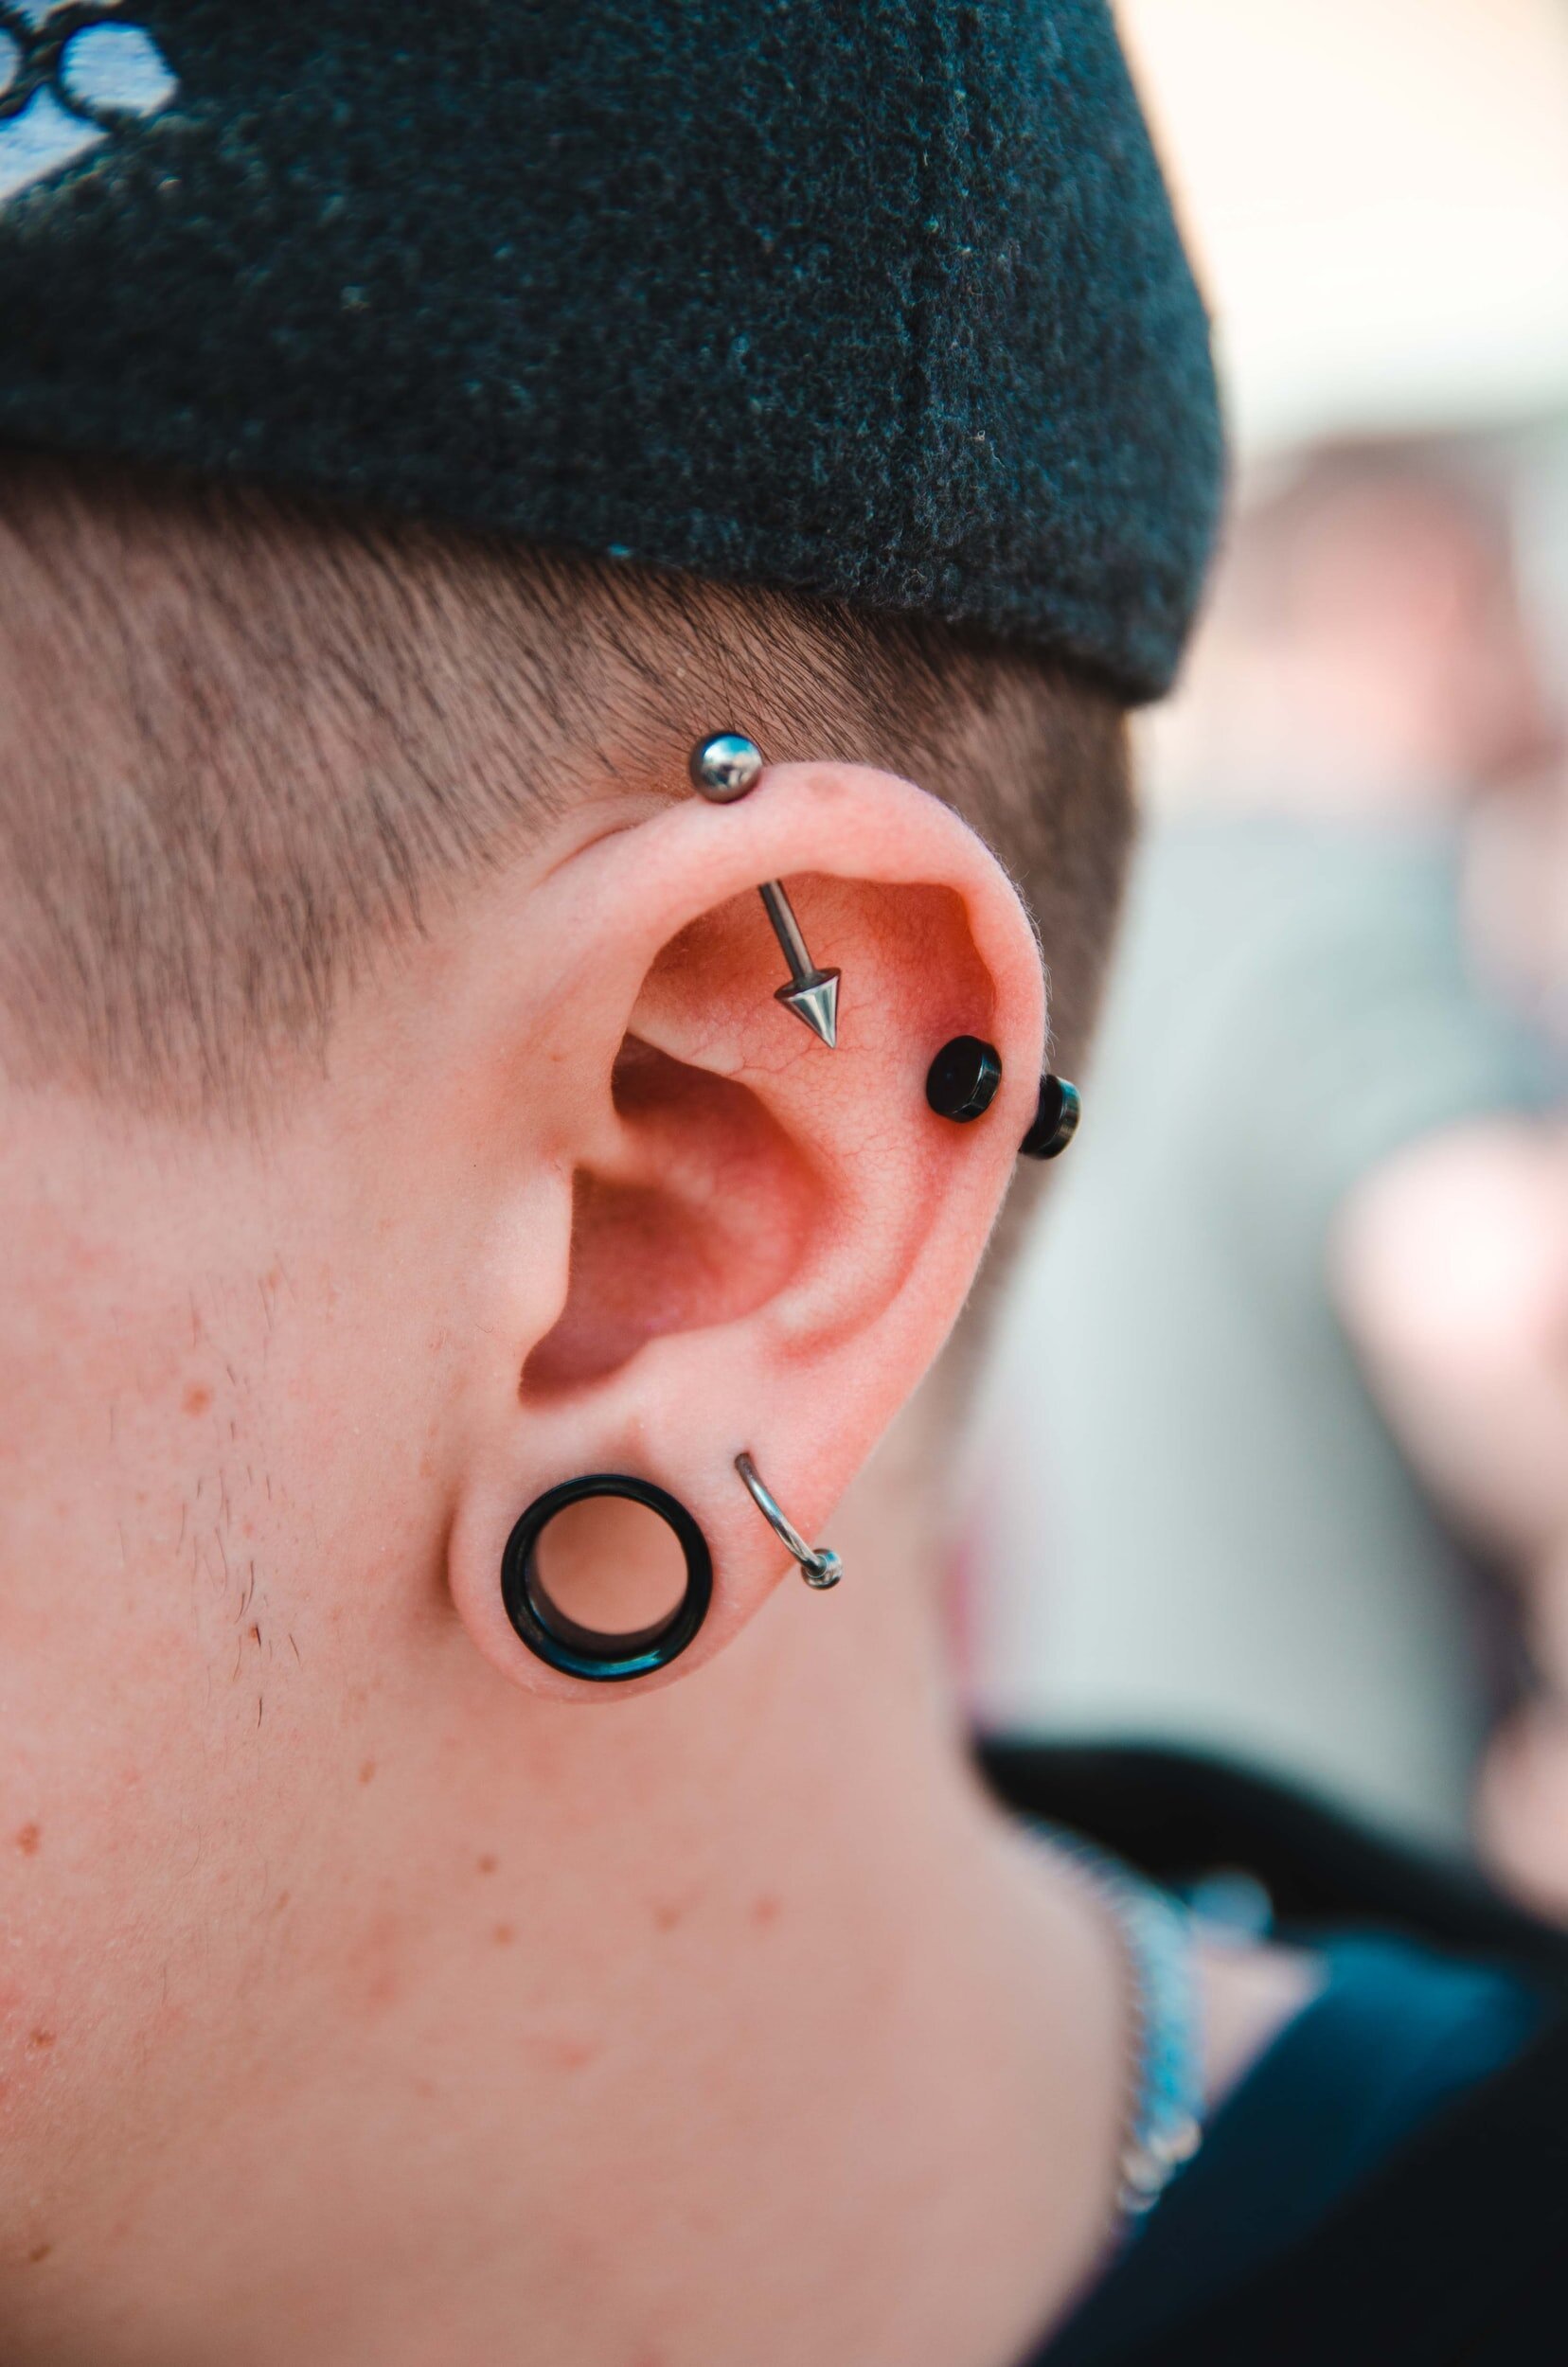 Why Are So Many People Getting Pierced These Days? — Certified